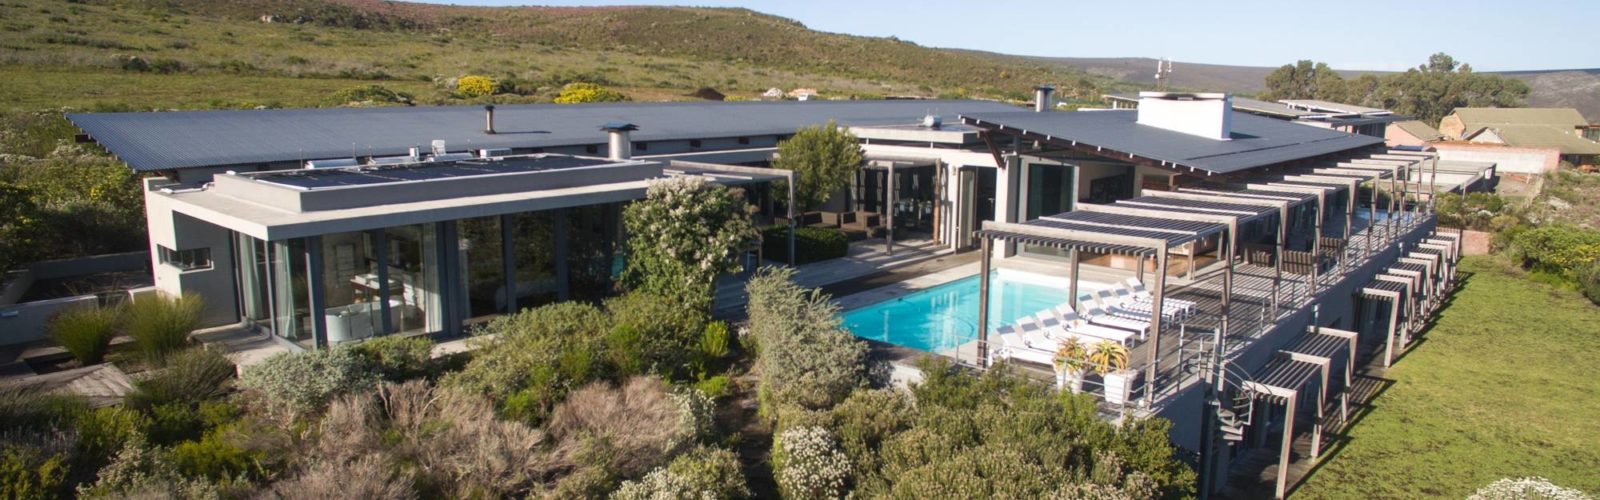 grootbos-private-villa-south-africa